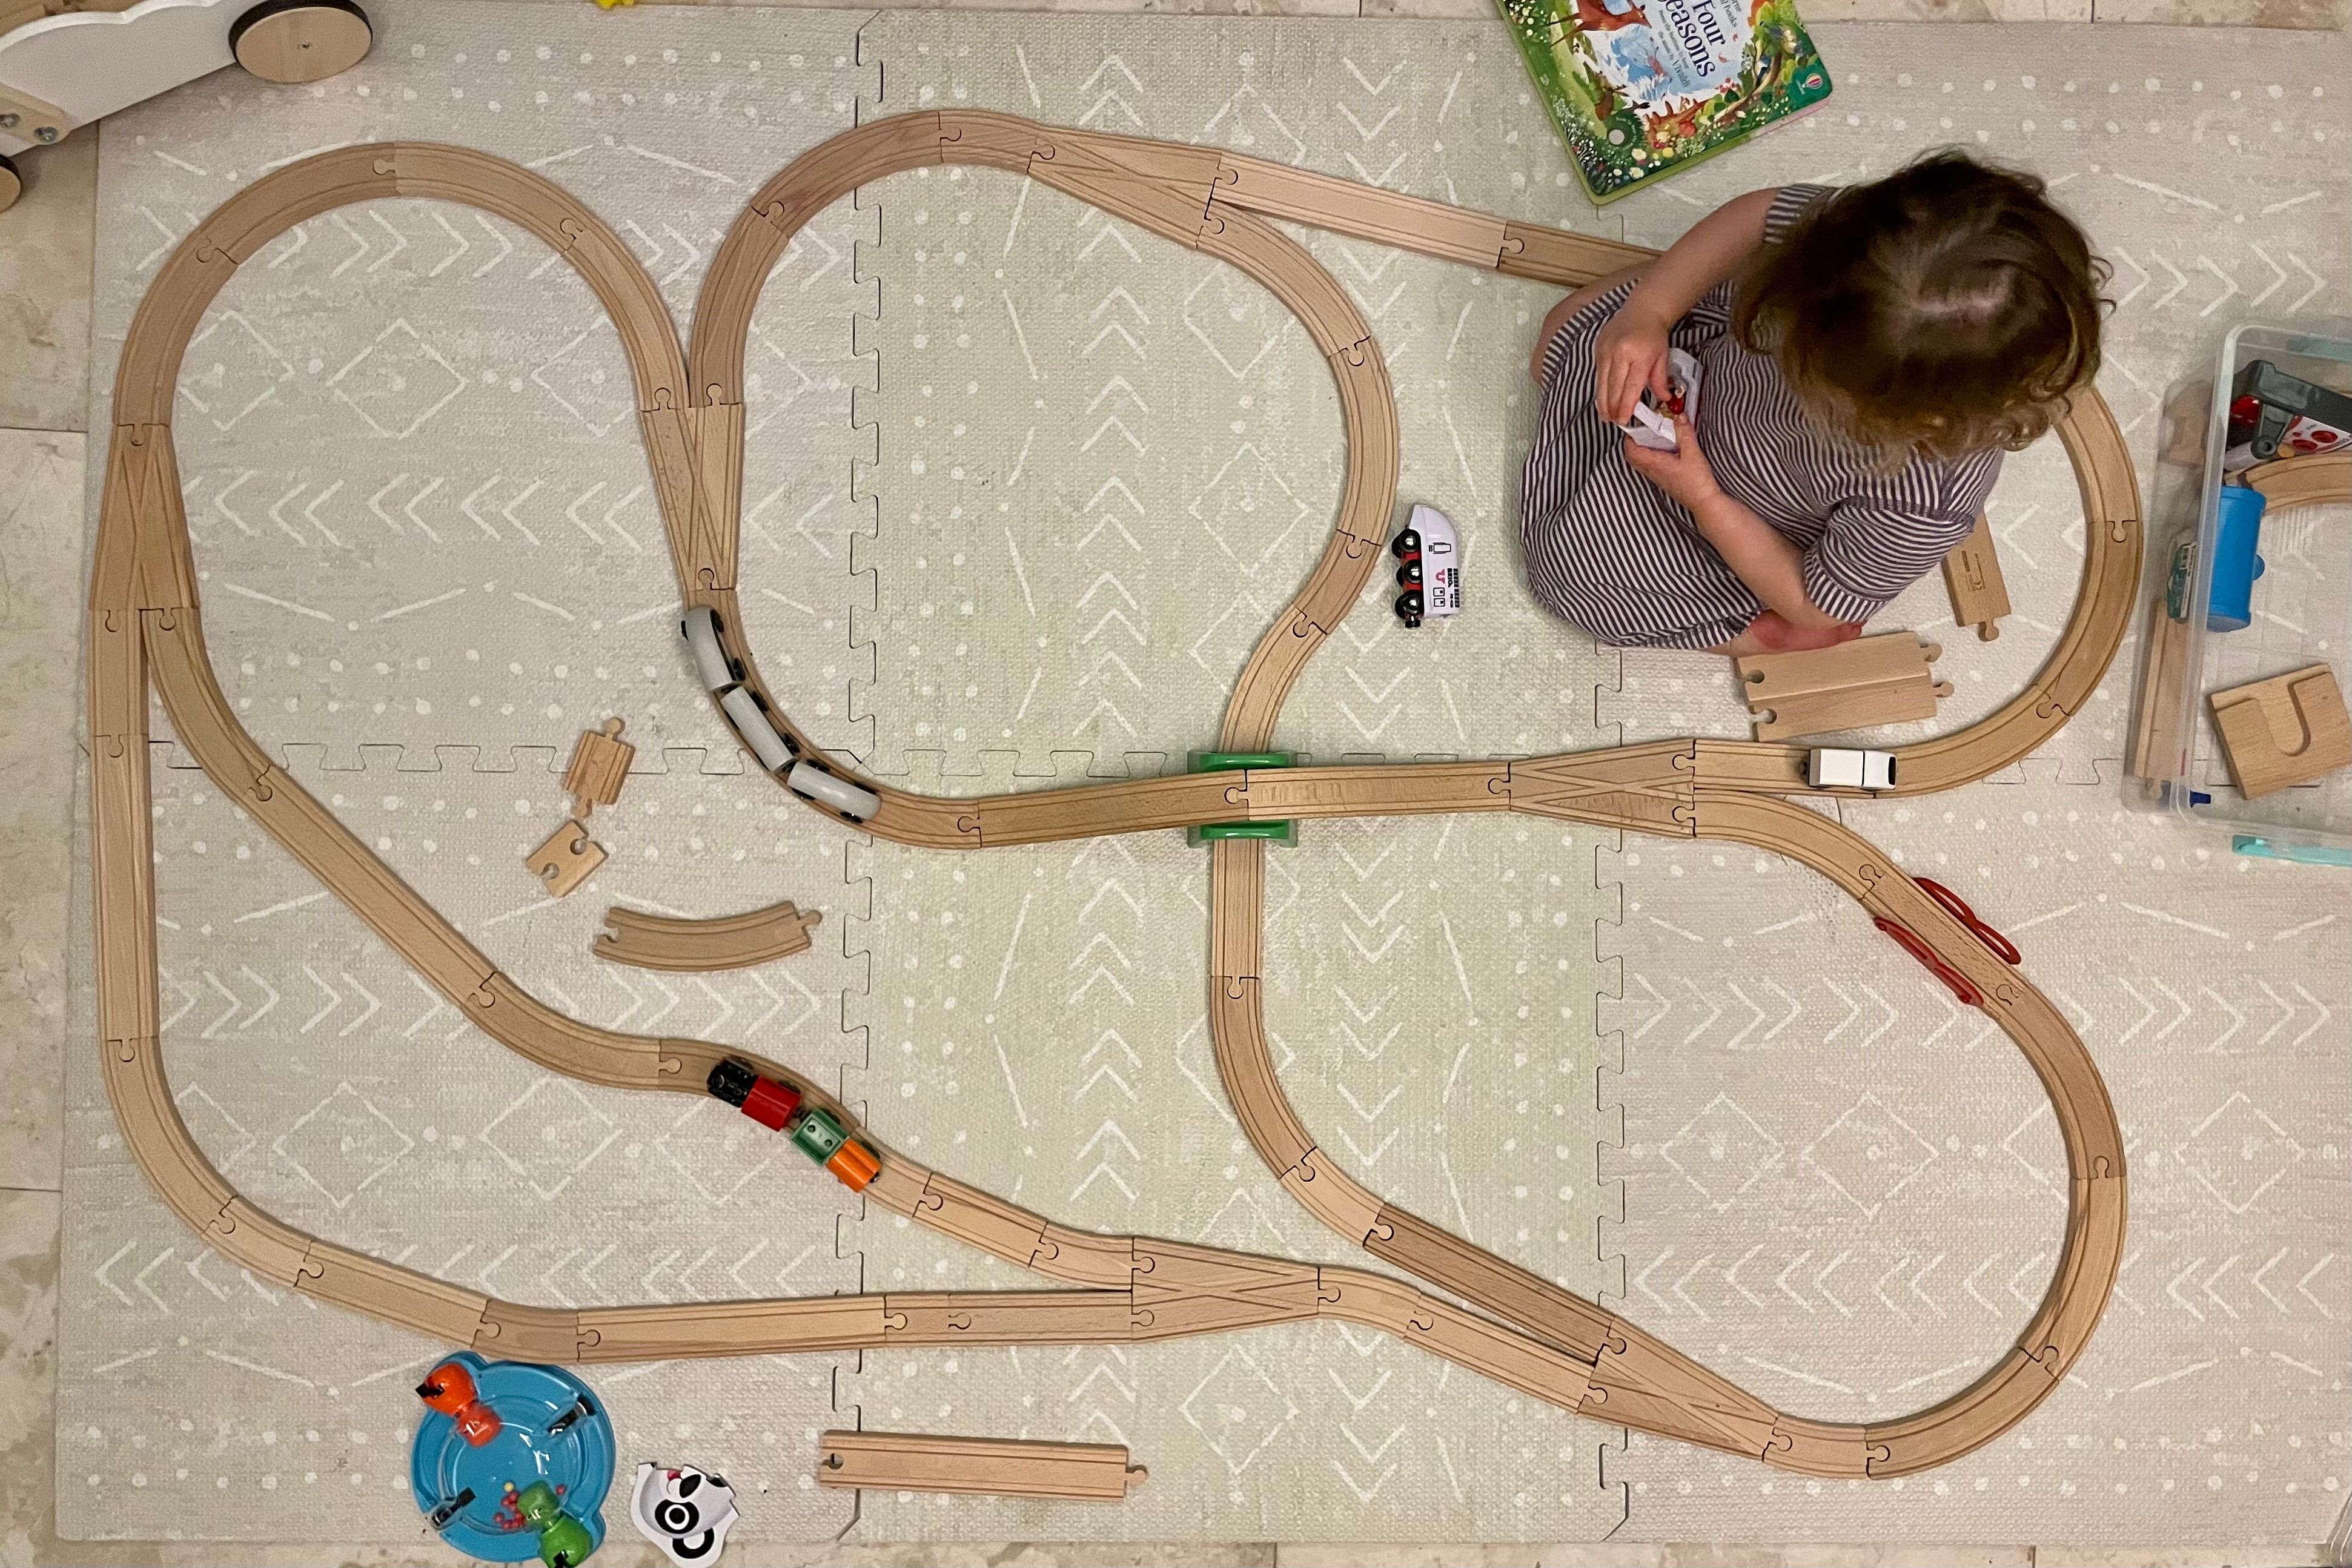 Bird’s-eye-view of a track layout including 6 forks and an overpass, with Verity sitting in the middle, looking down at a train in her hands.